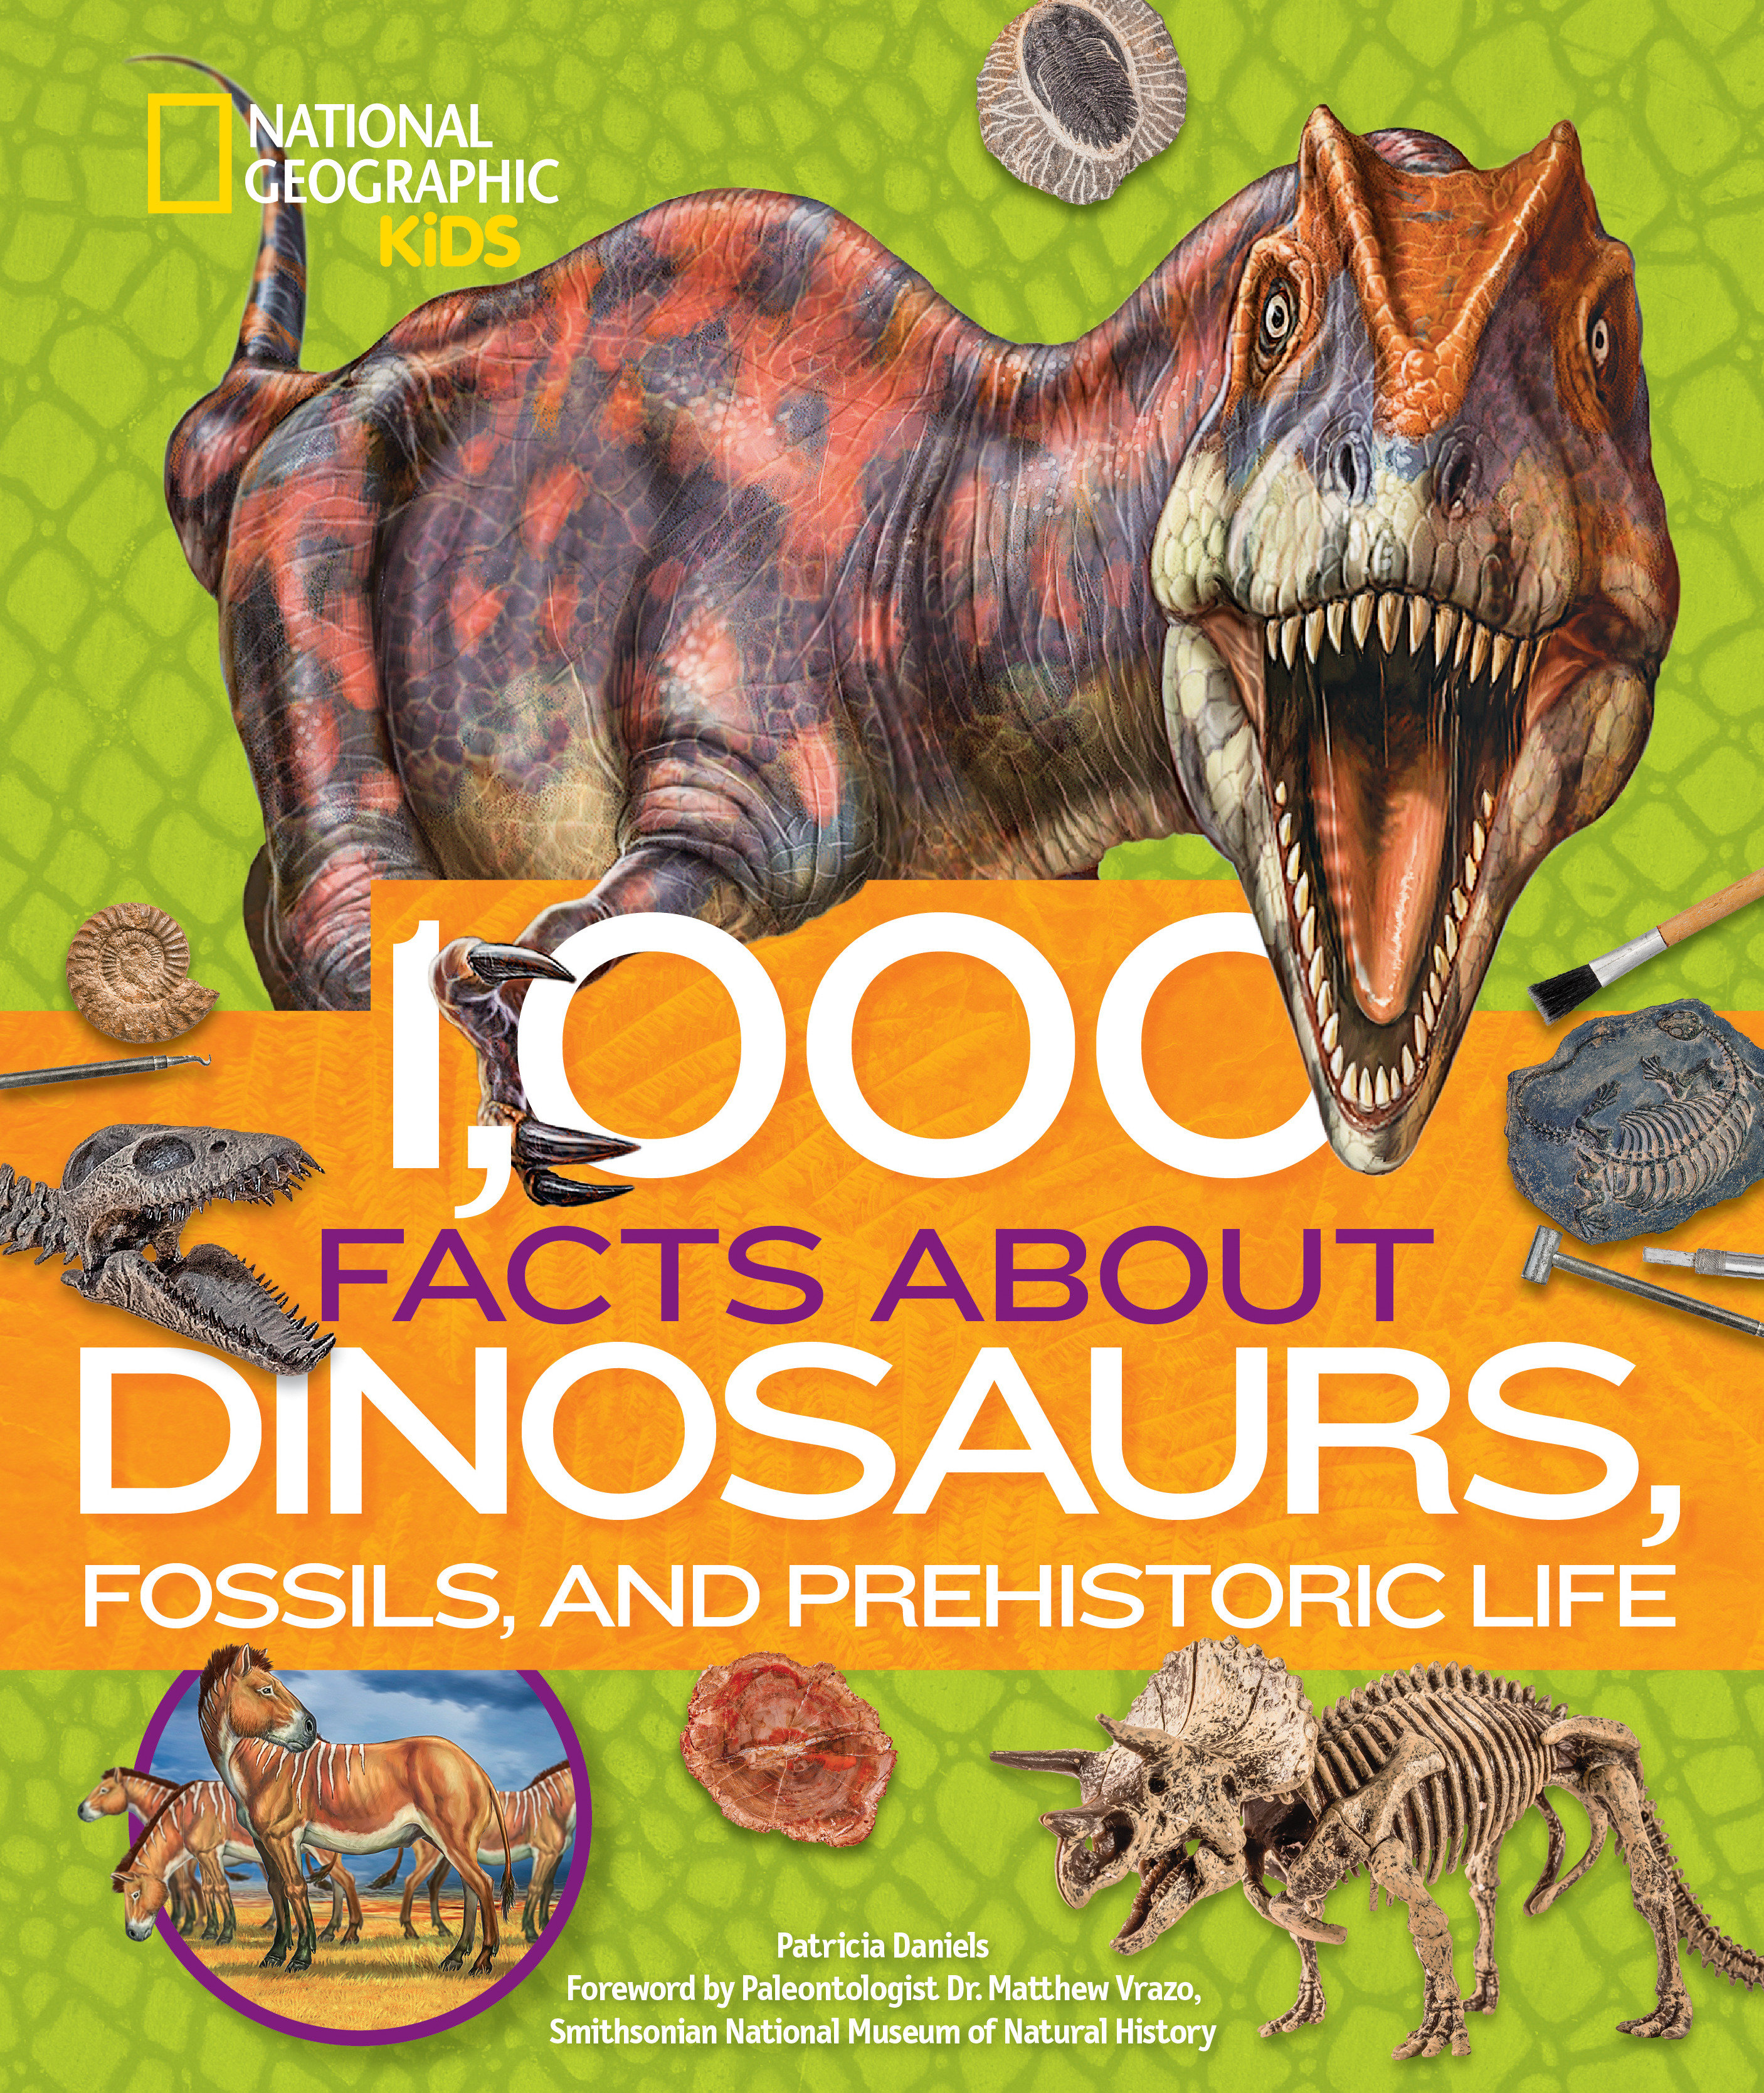 1,000 Facts About Dinosaurs, Fossils, And Prehistoric Life Hardcover